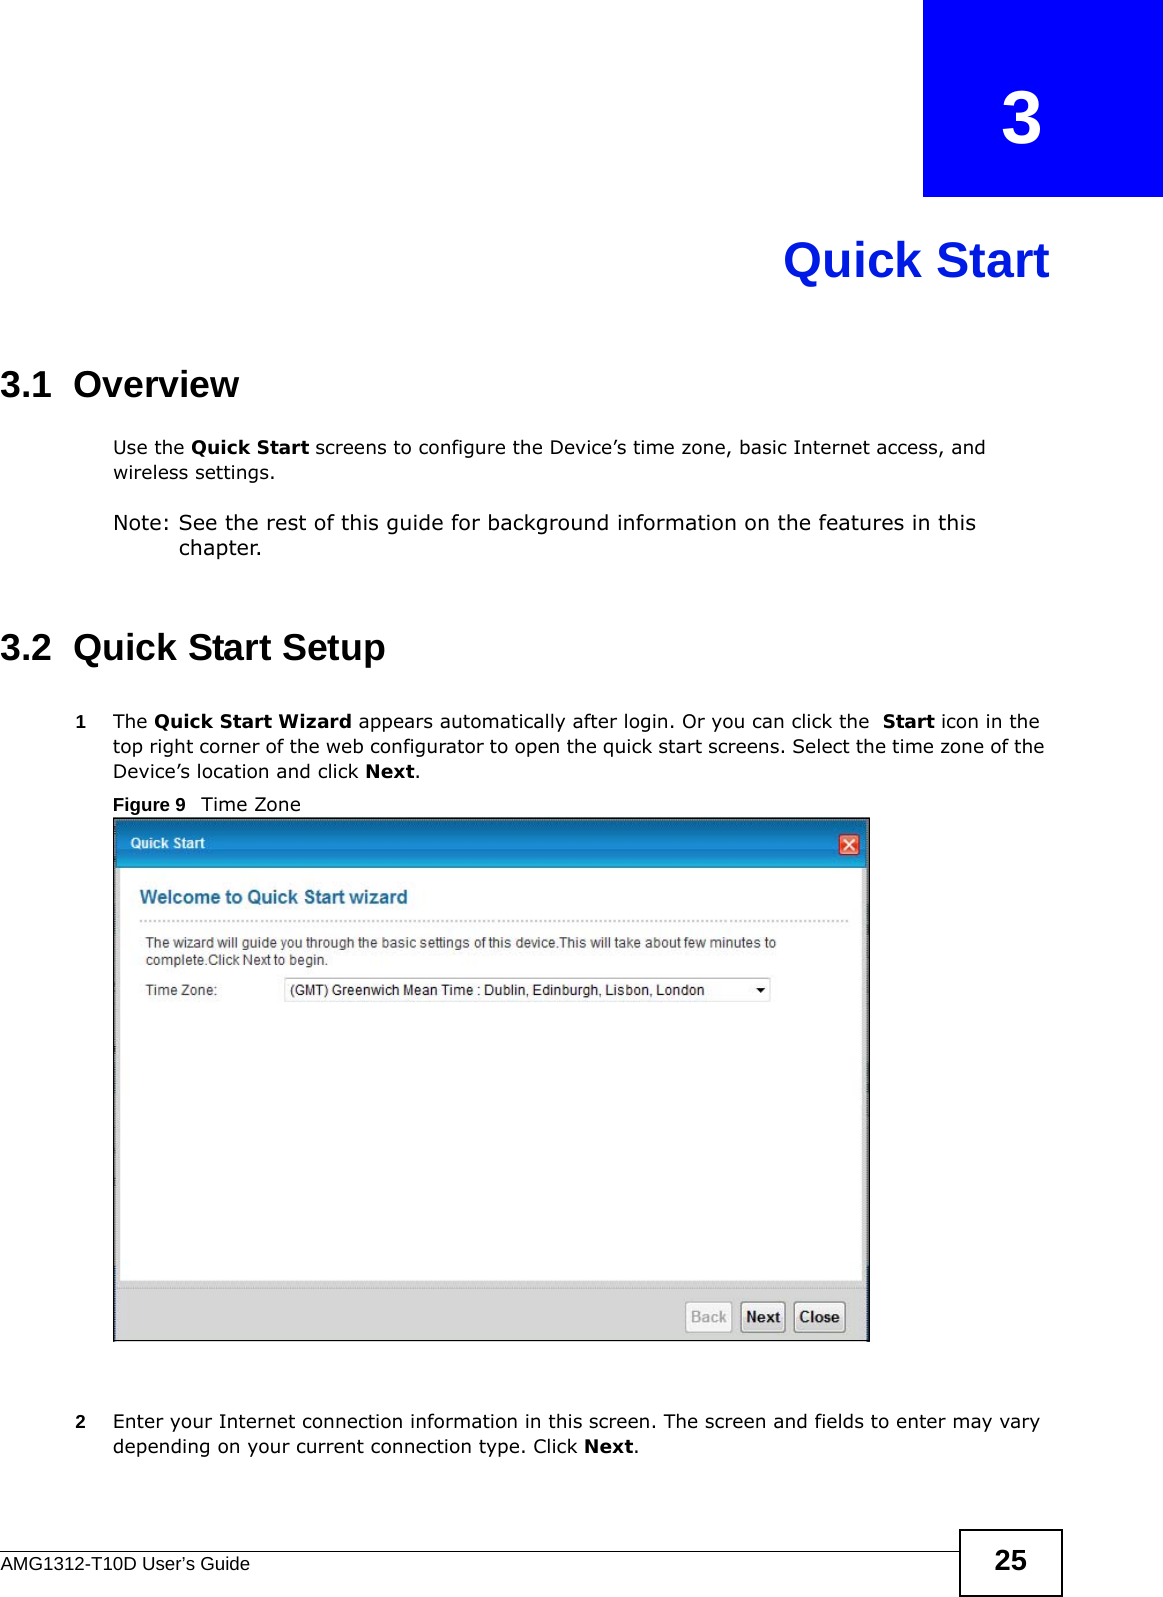 AMG1312-T10D User’s Guide 25CHAPTER   3Quick Start3.1  OverviewUse the Quick Start screens to configure the Device’s time zone, basic Internet access, and wireless settings.Note: See the rest of this guide for background information on the features in this chapter.3.2  Quick Start Setup1The Quick Start Wizard appears automatically after login. Or you can click the  Start icon in the top right corner of the web configurator to open the quick start screens. Select the time zone of the Device’s location and click Next. Figure 9   Time Zone 2Enter your Internet connection information in this screen. The screen and fields to enter may vary depending on your current connection type. Click Next.